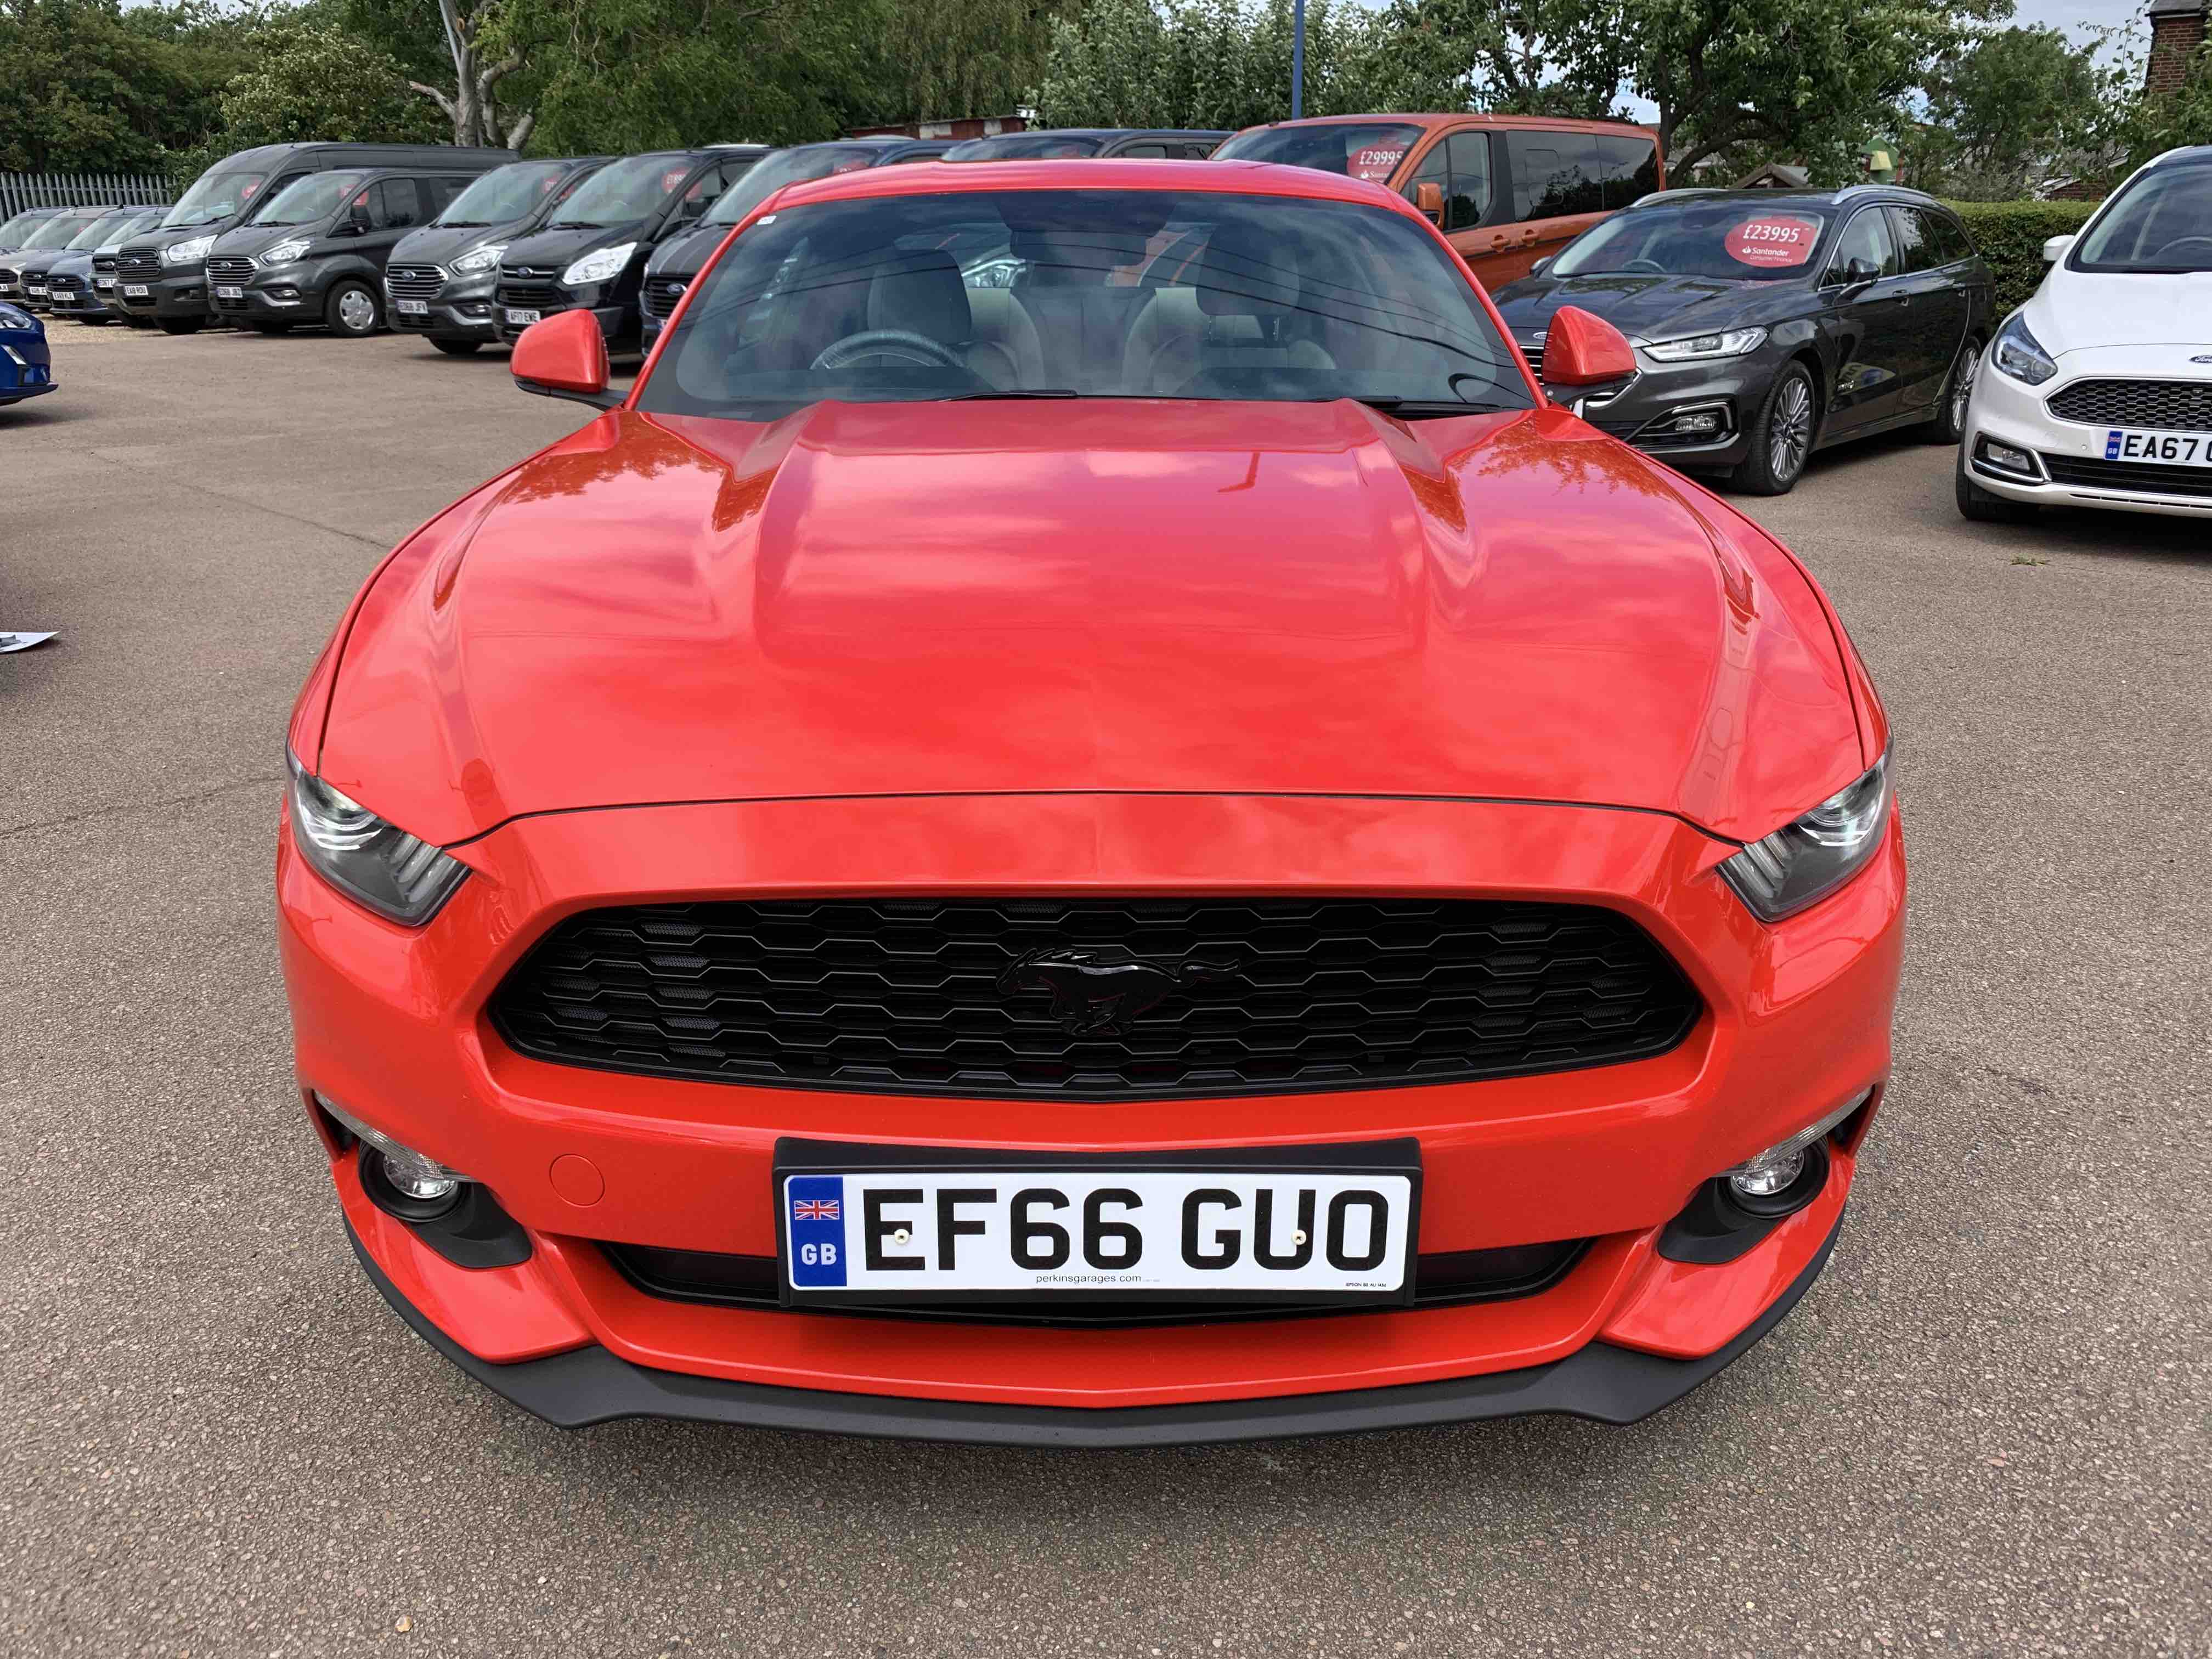 Mustang for sale Chelmsford